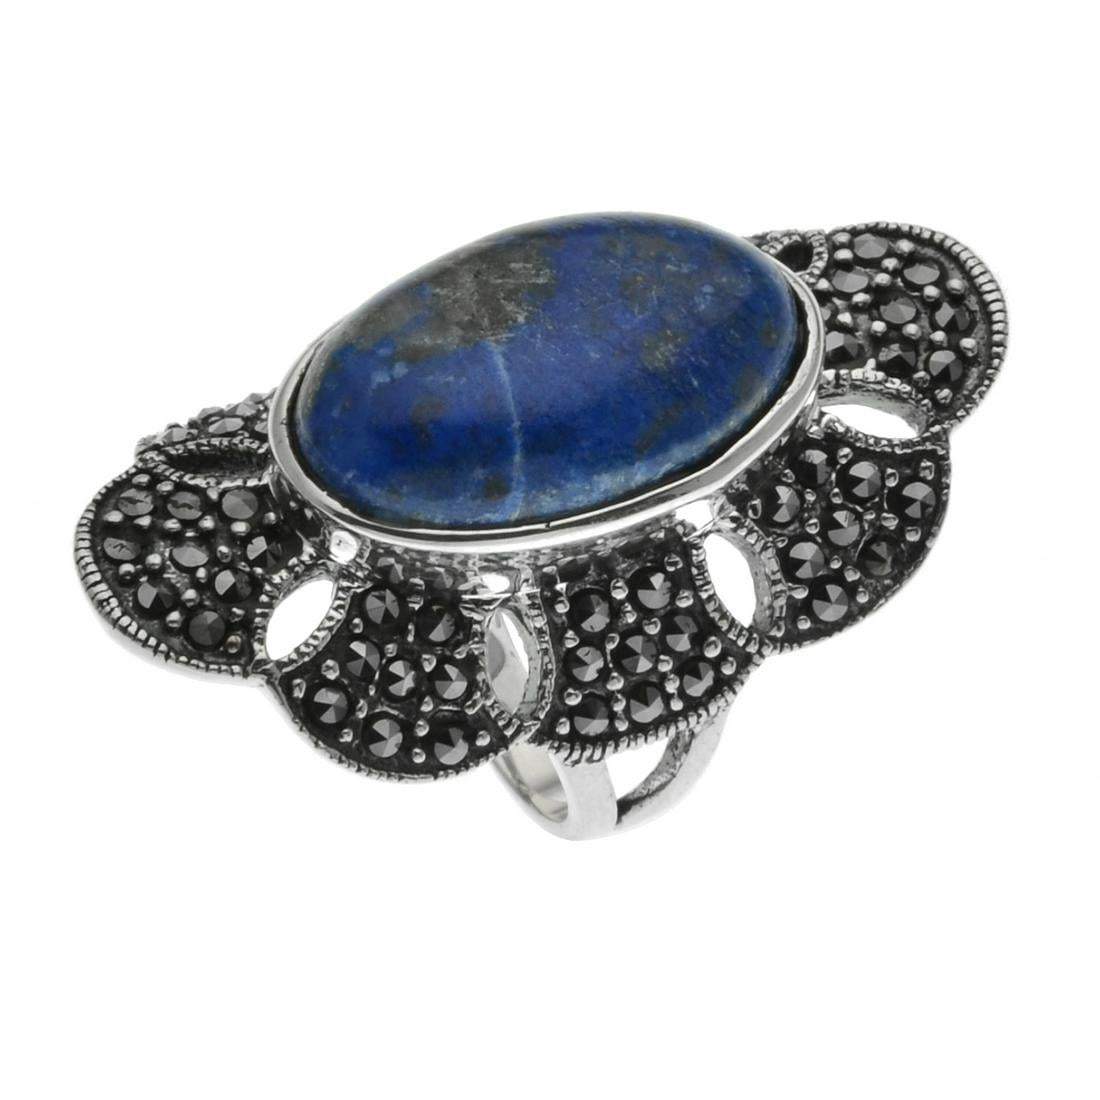 Sterling Silver Lapis & Marcasite Ring-Size 5 - Shop Thrifty Treasures